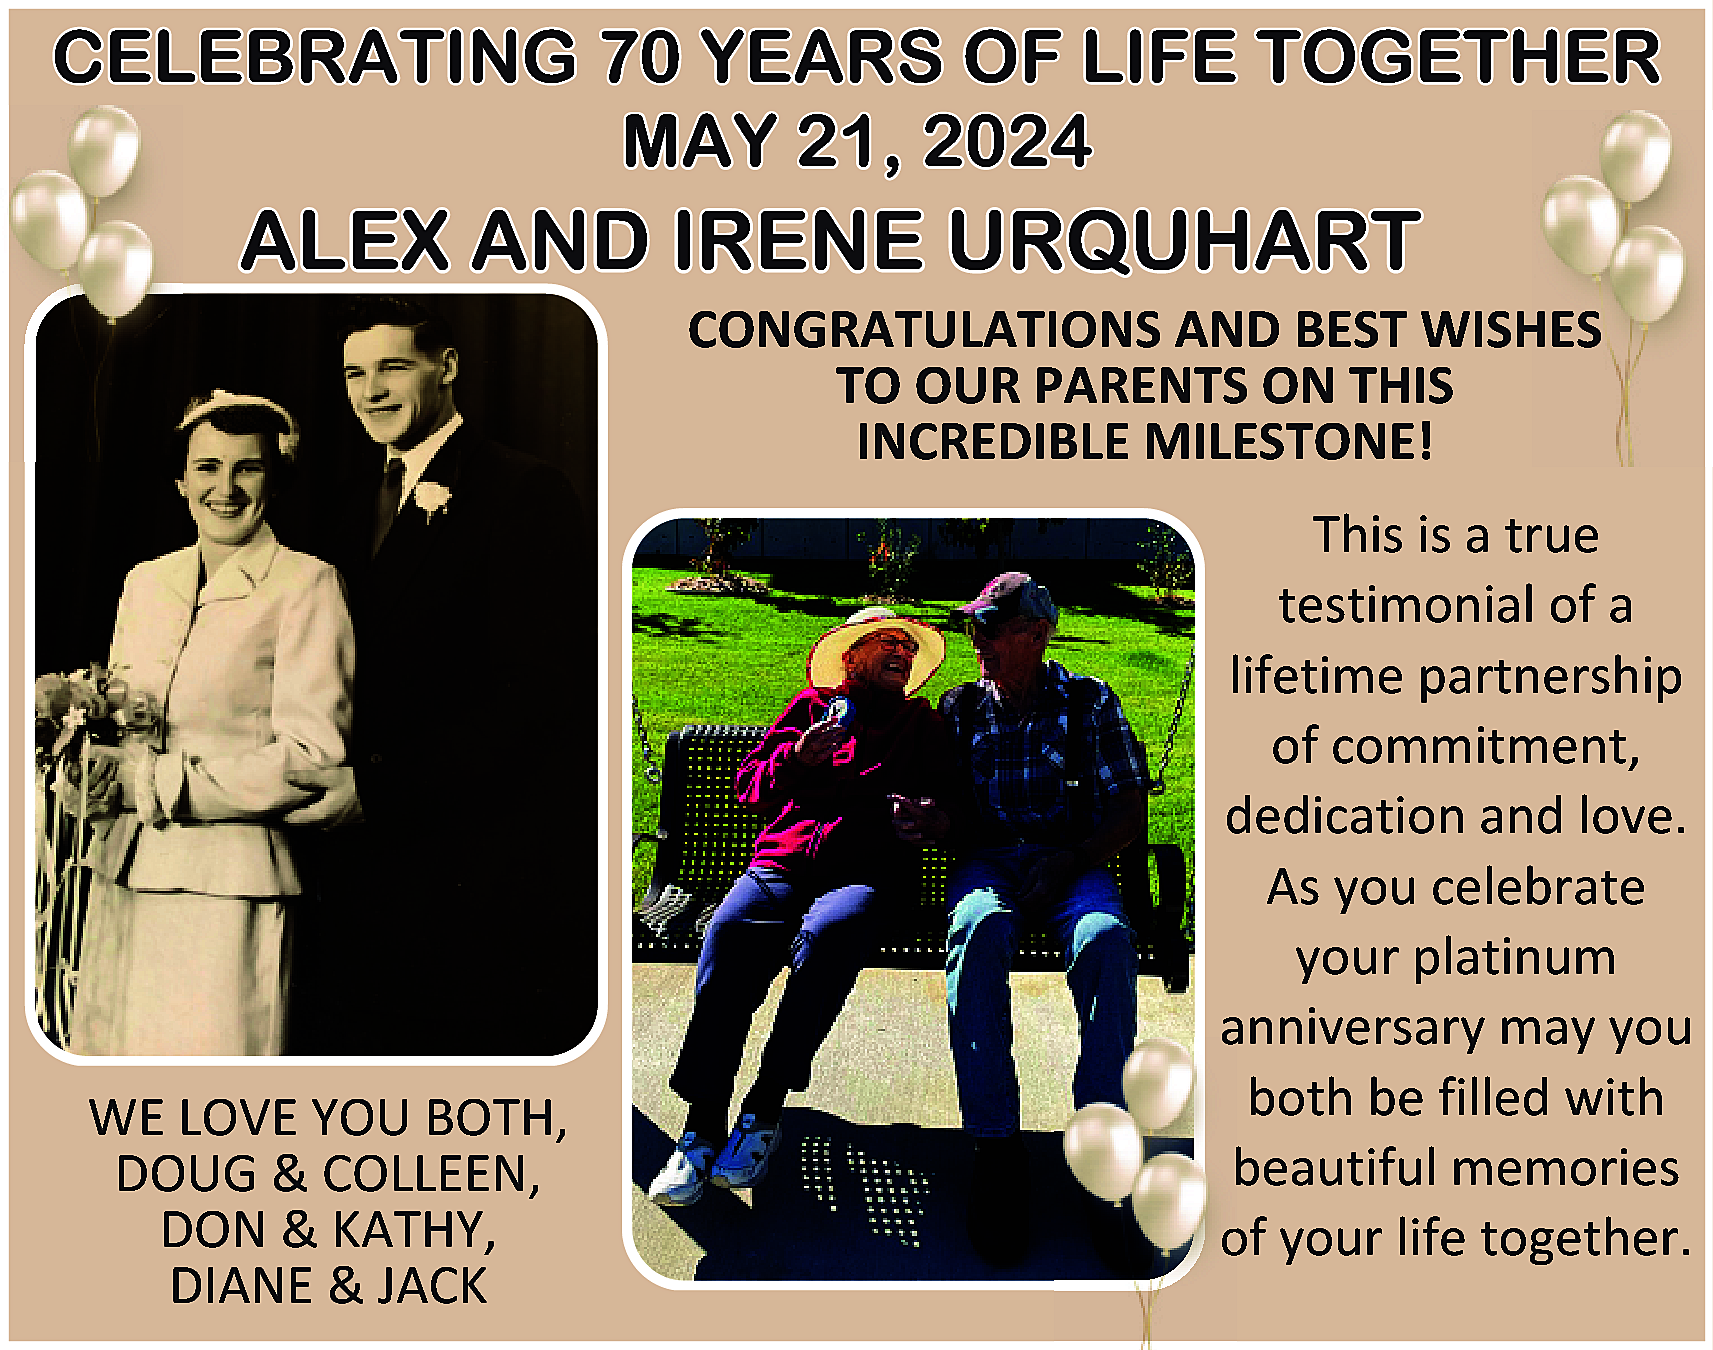 CELEBRATING 70 YEARS OF LIFE  CELEBRATING 70 YEARS OF LIFE TOGETHER  MAY 21, 2024    ALEX AND IRENE URQUHART    CONGRATULATIONS AND BEST WISHES  TO OUR PARENTS ON THIS  INCREDIBLE MILESTONE!    WE LOVE YOU BOTH,  DOUG & COLLEEN,  DON & KATHY,  DIANE & JACK    This is a true  testimonial of a  lifetime partnership  of commitment,  dedication and love.  As you celebrate  your platinum  anniversary may you  both be filled with  beautiful memories  of your life together.    